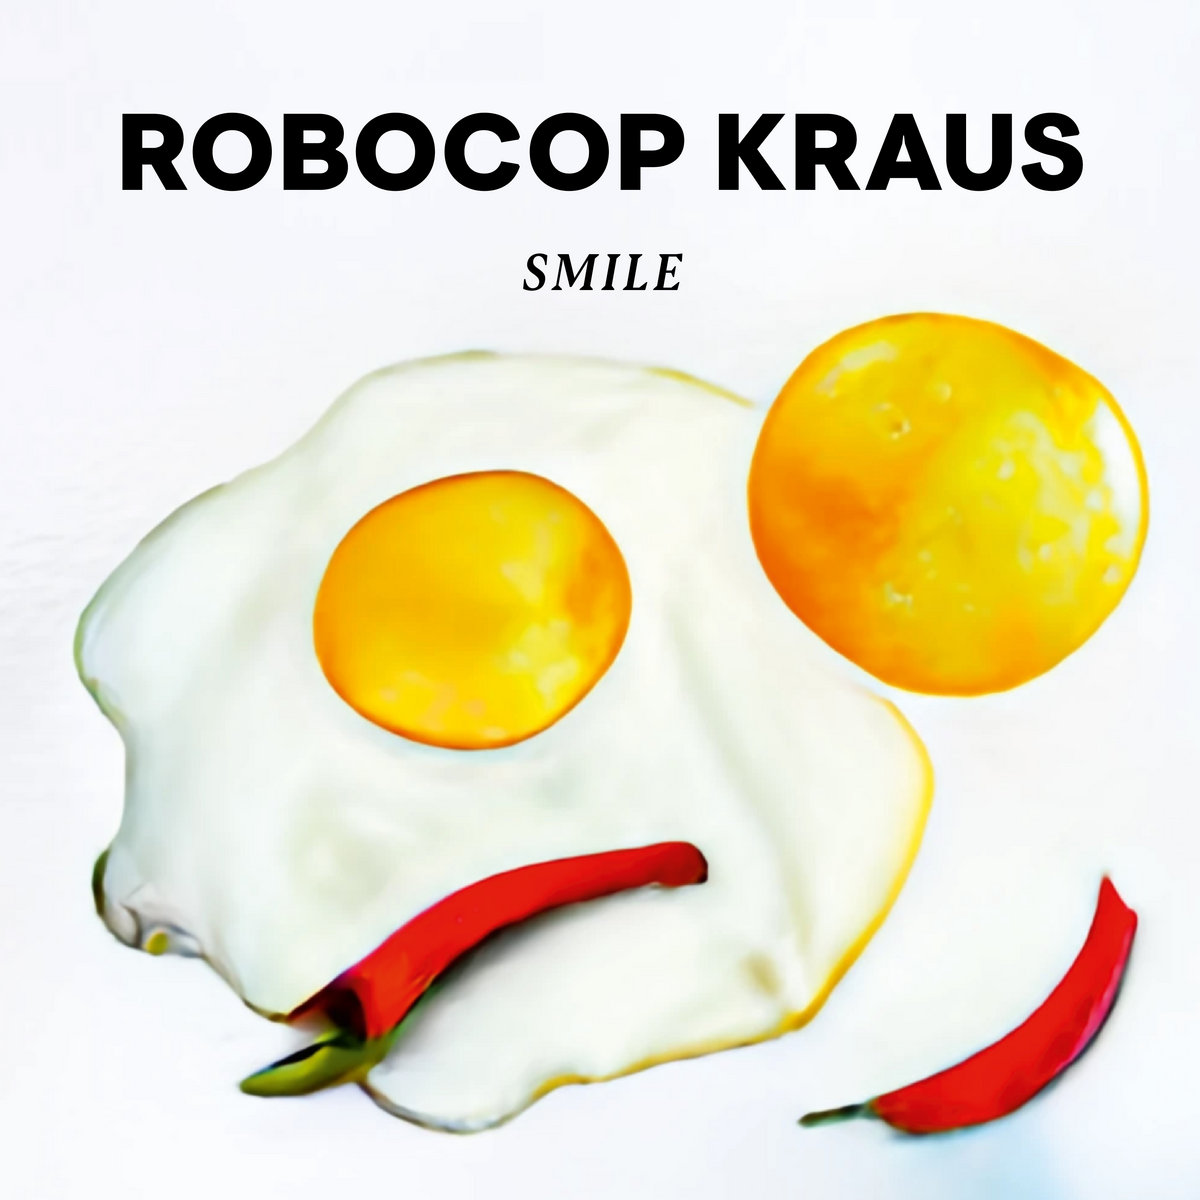 Ennobling the Concept of the Comeback Record – Germany’s Robocop Kraus Return After 15 Years Without Missing a Beat